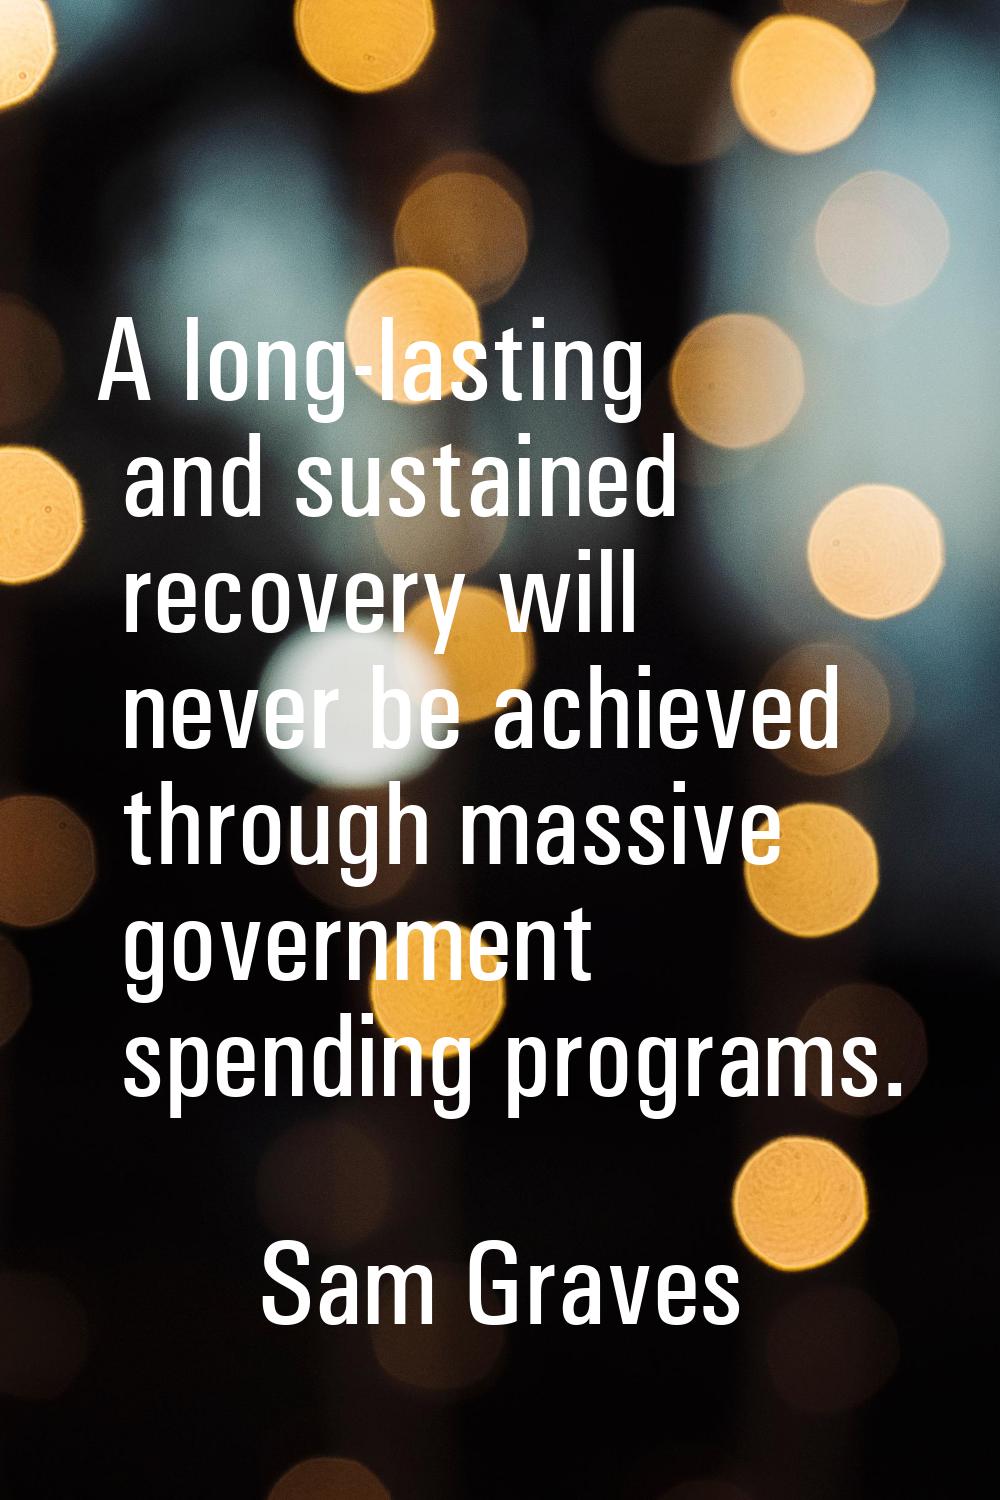 A long-lasting and sustained recovery will never be achieved through massive government spending pr